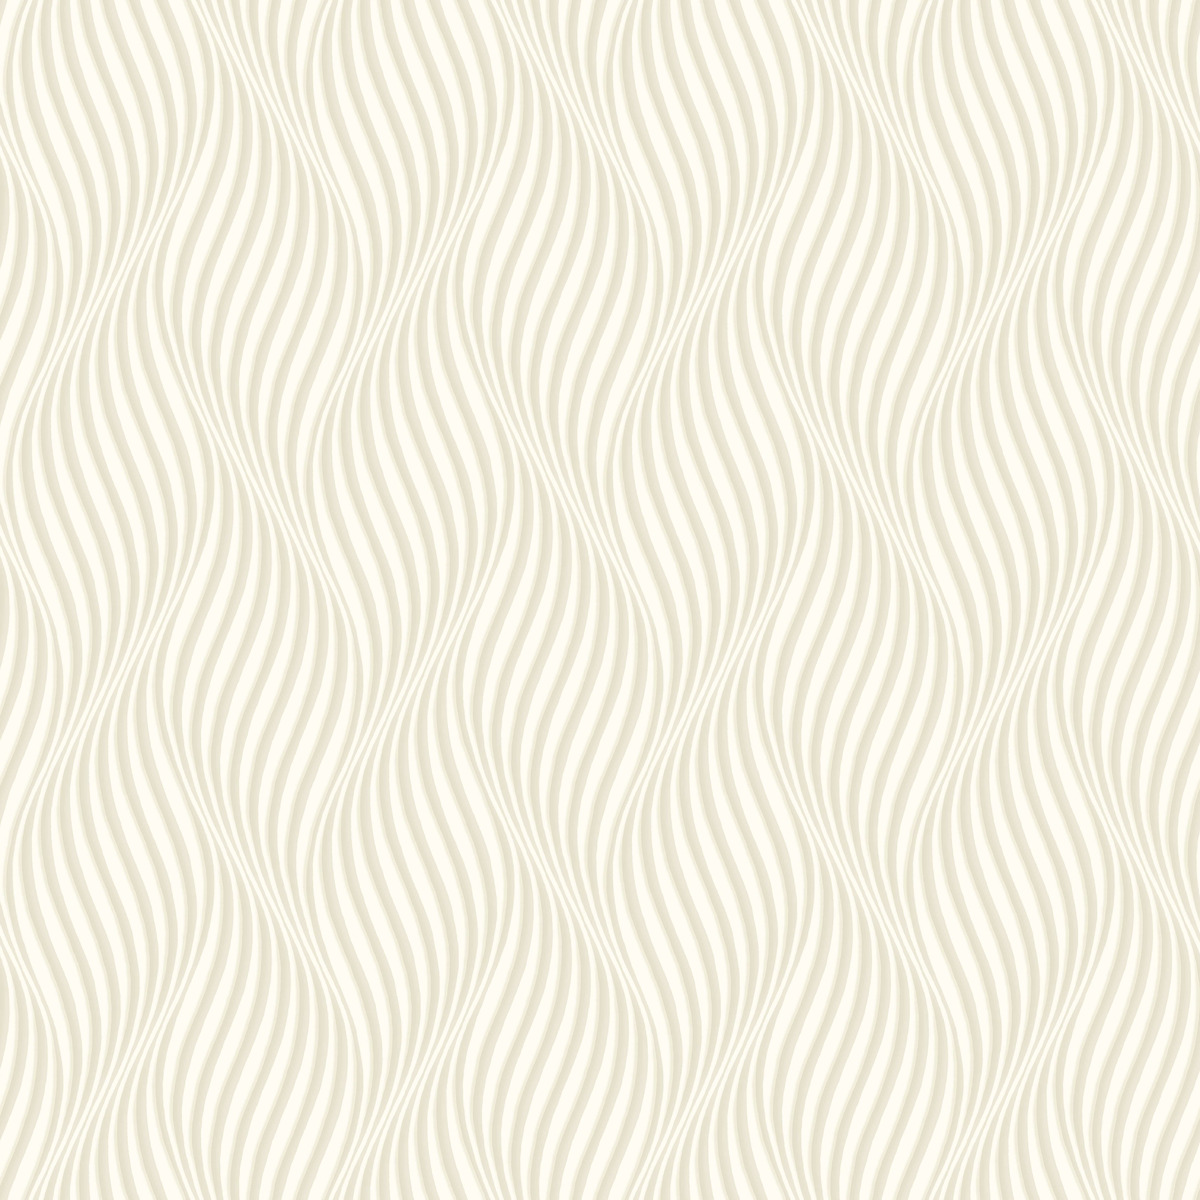 Ashford House Groovy Wallpaper - Pearl |Wallpaper And Borders |The Mural  Store